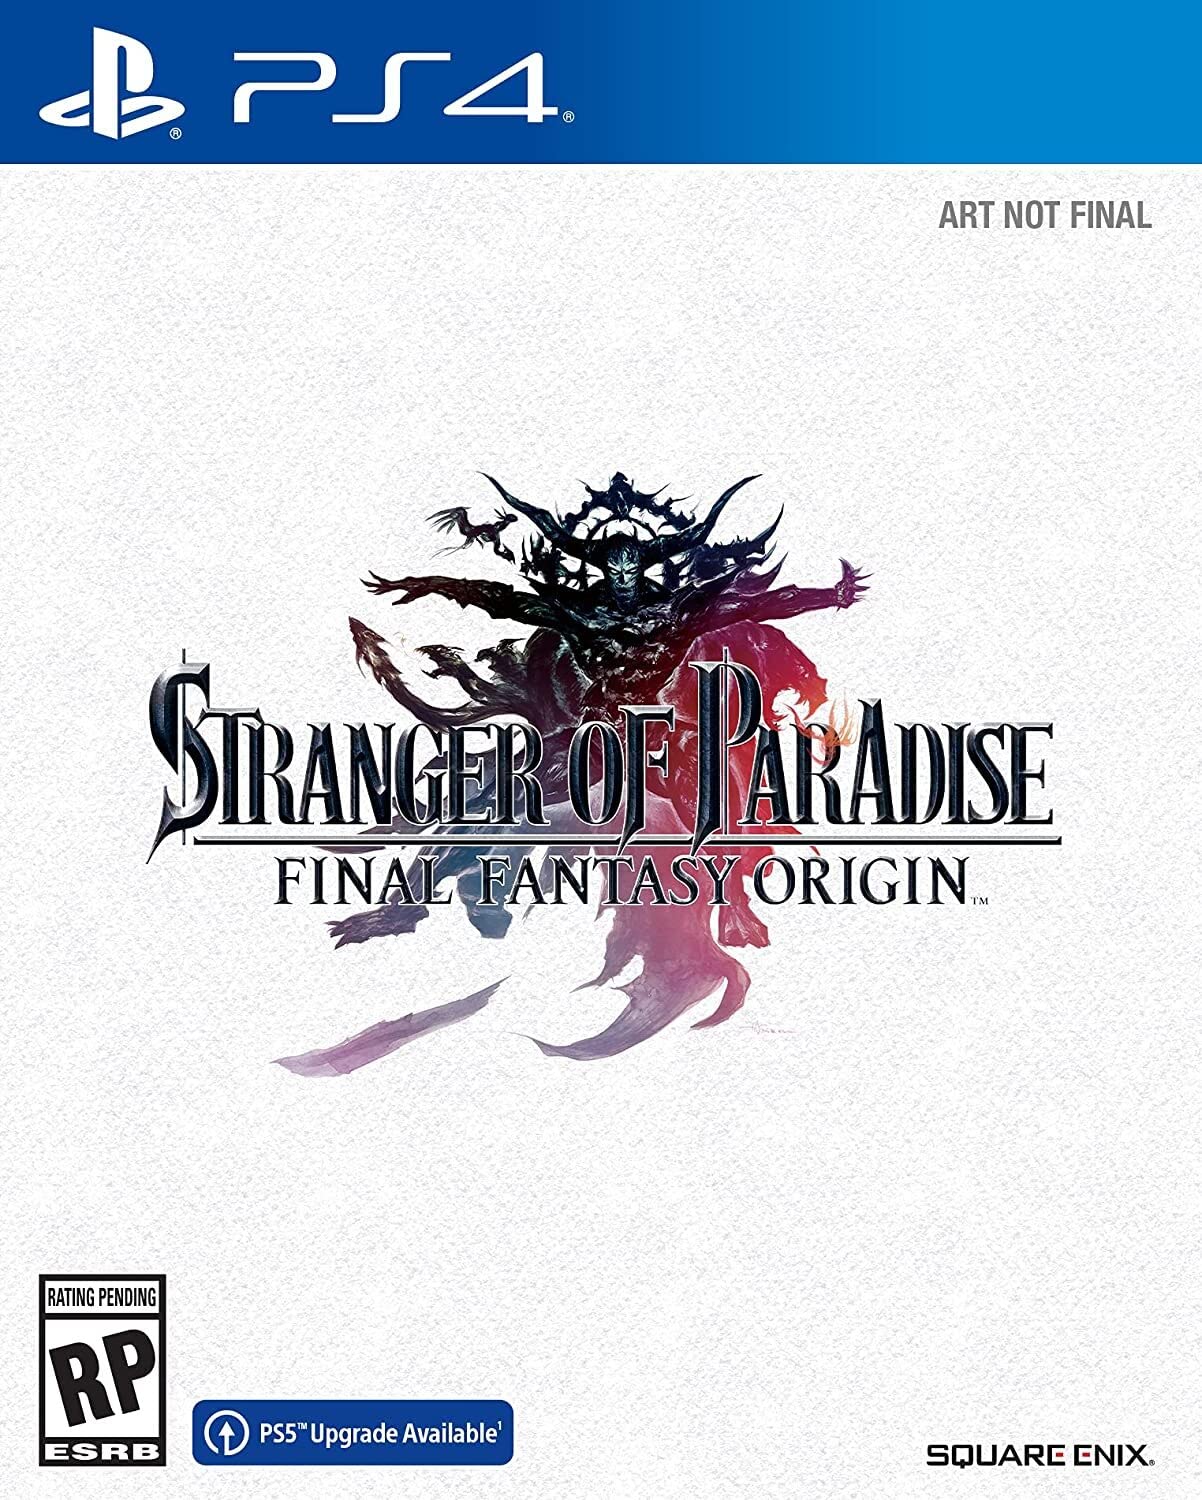 Stranger of Paradise Final Fantasy Origin PlayStation 4 with Free Upgrade to the Digital PS5 Version